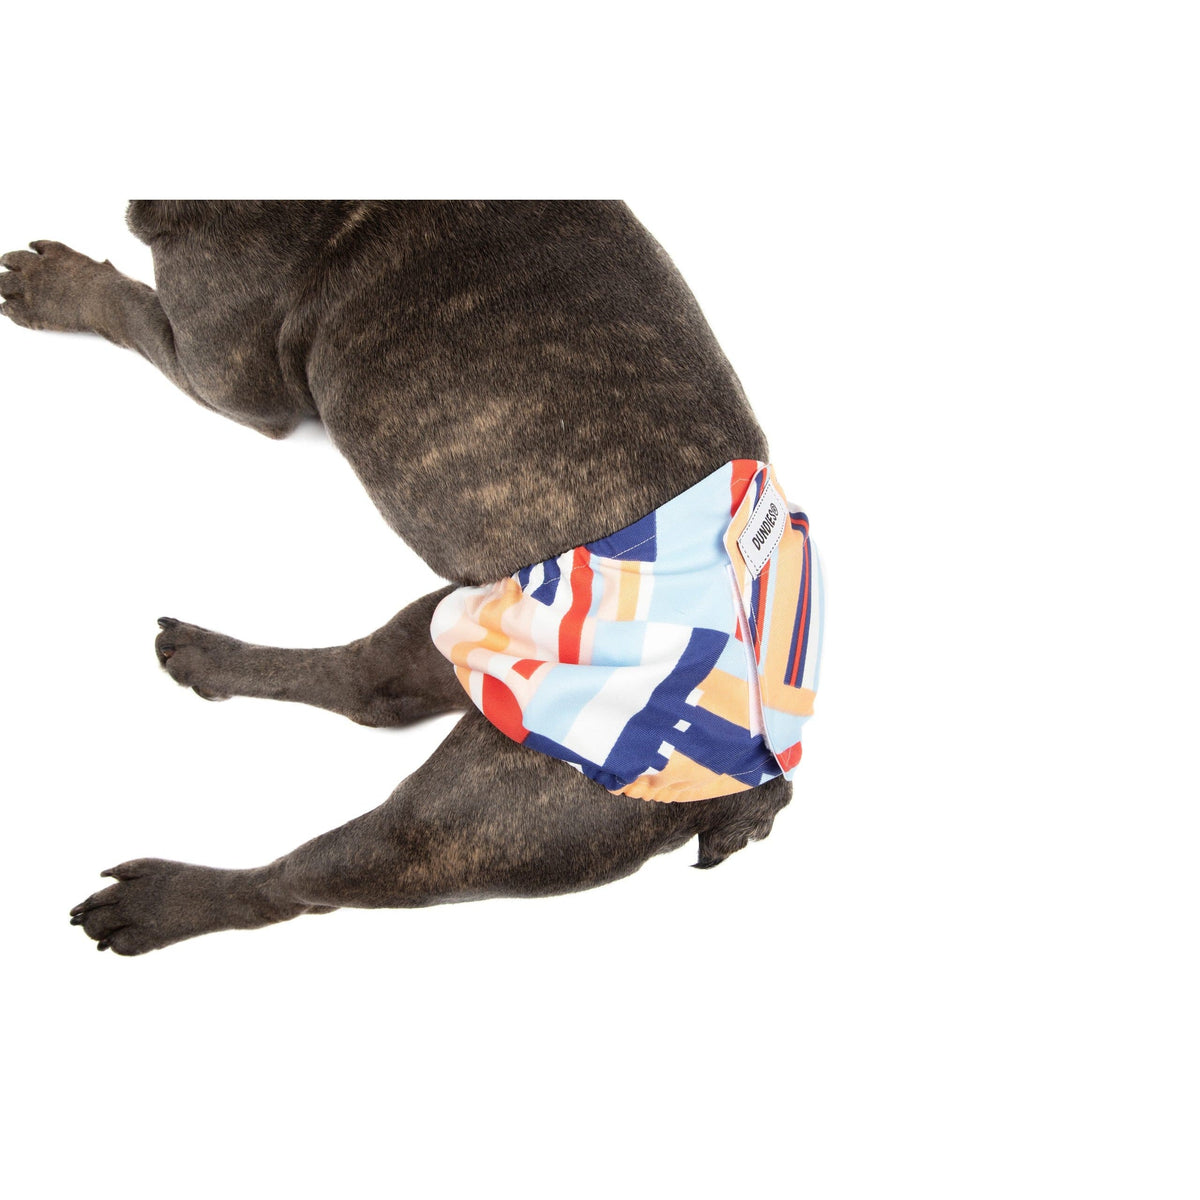 Dundies Sherbet Belly Band-Dundies Australia - Vet Recommended Pet Nappies